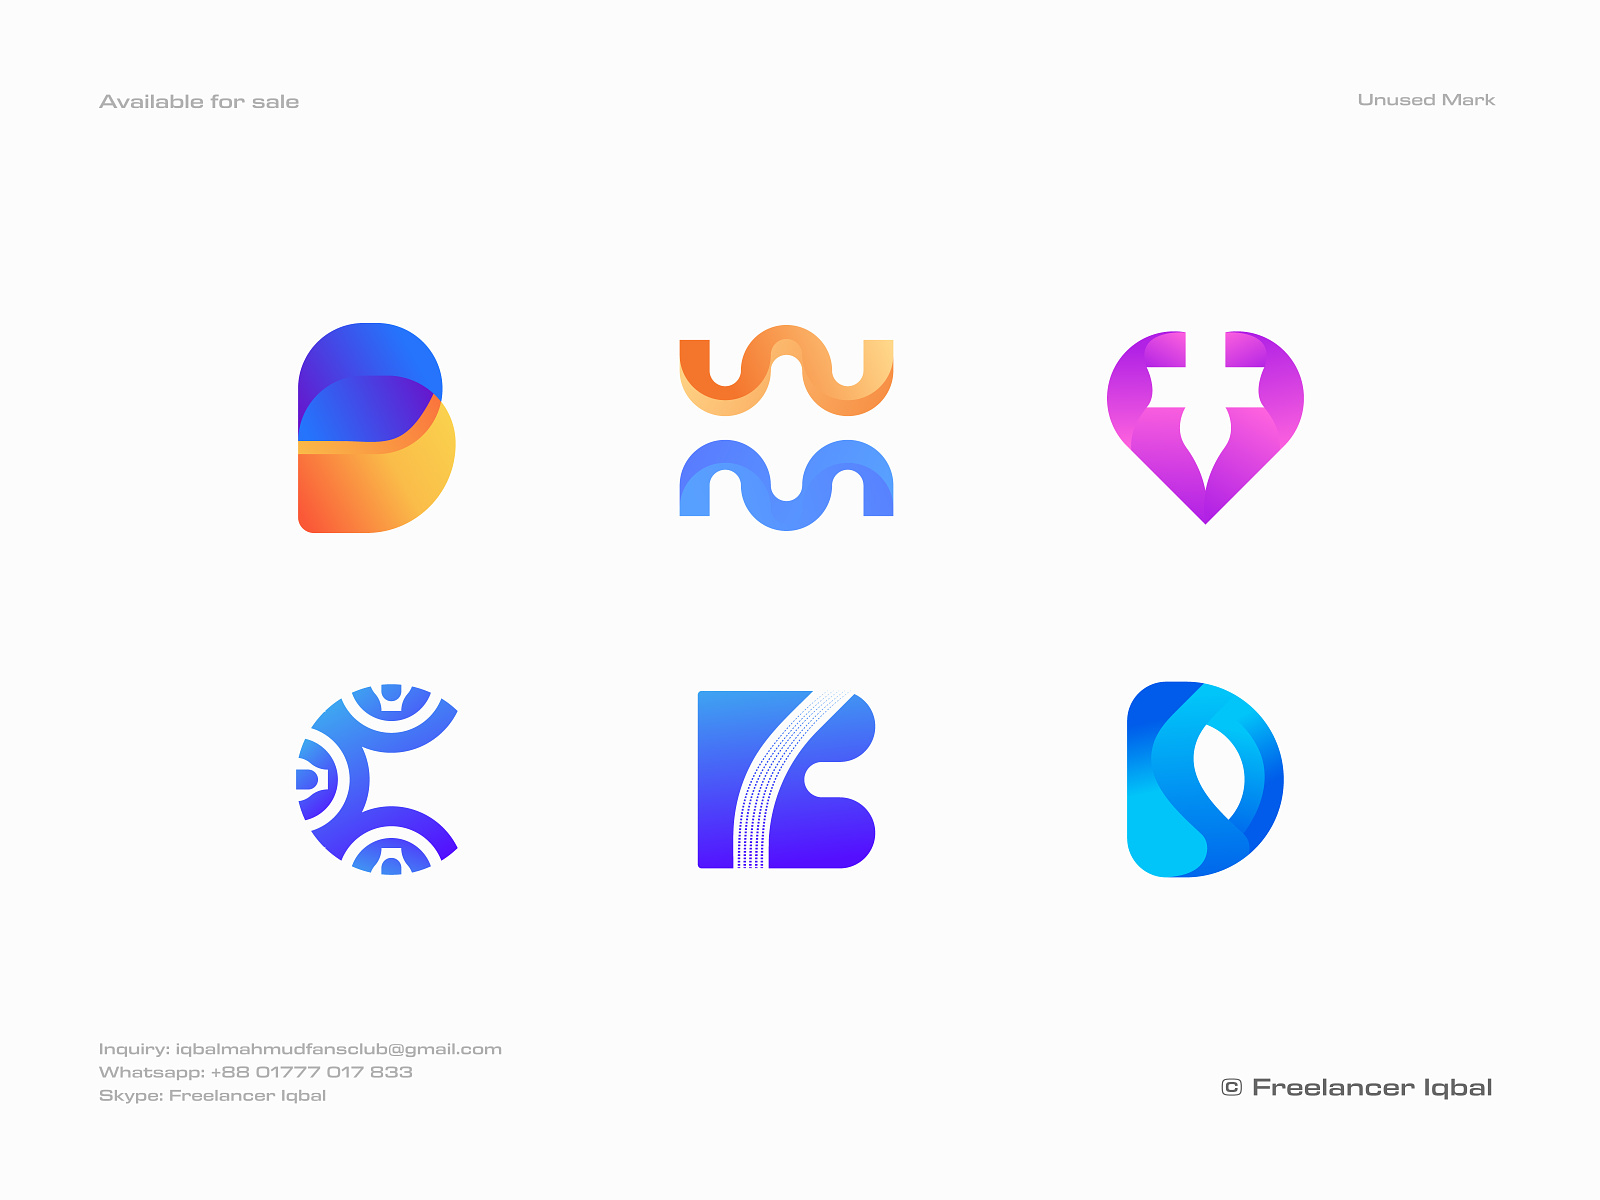 Logo Design Collection 2023 Vol 04 Logo Trends 2023 by Md Iqbal Hossain on Dribbble